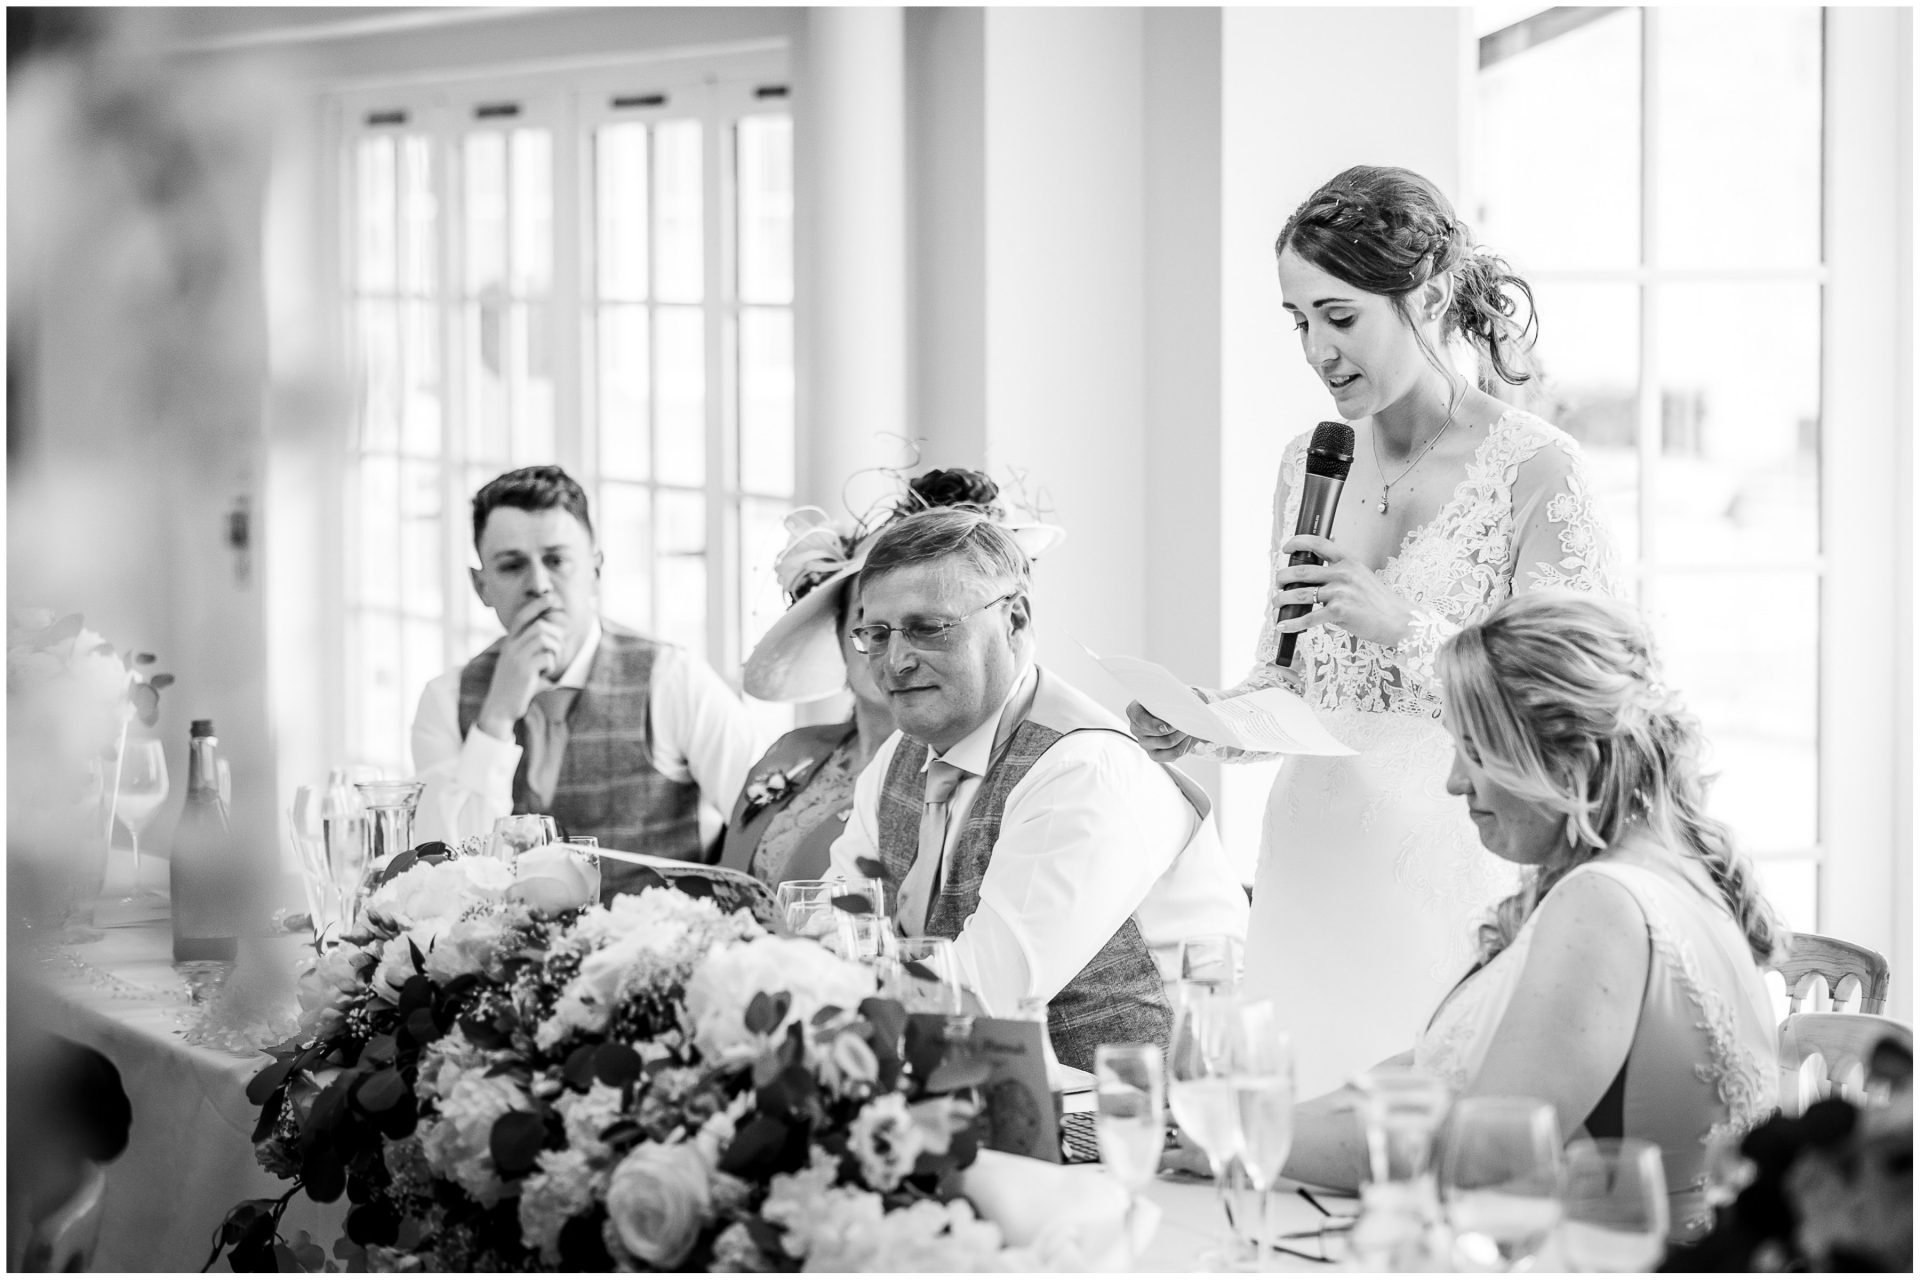 The bride stands to make a speech